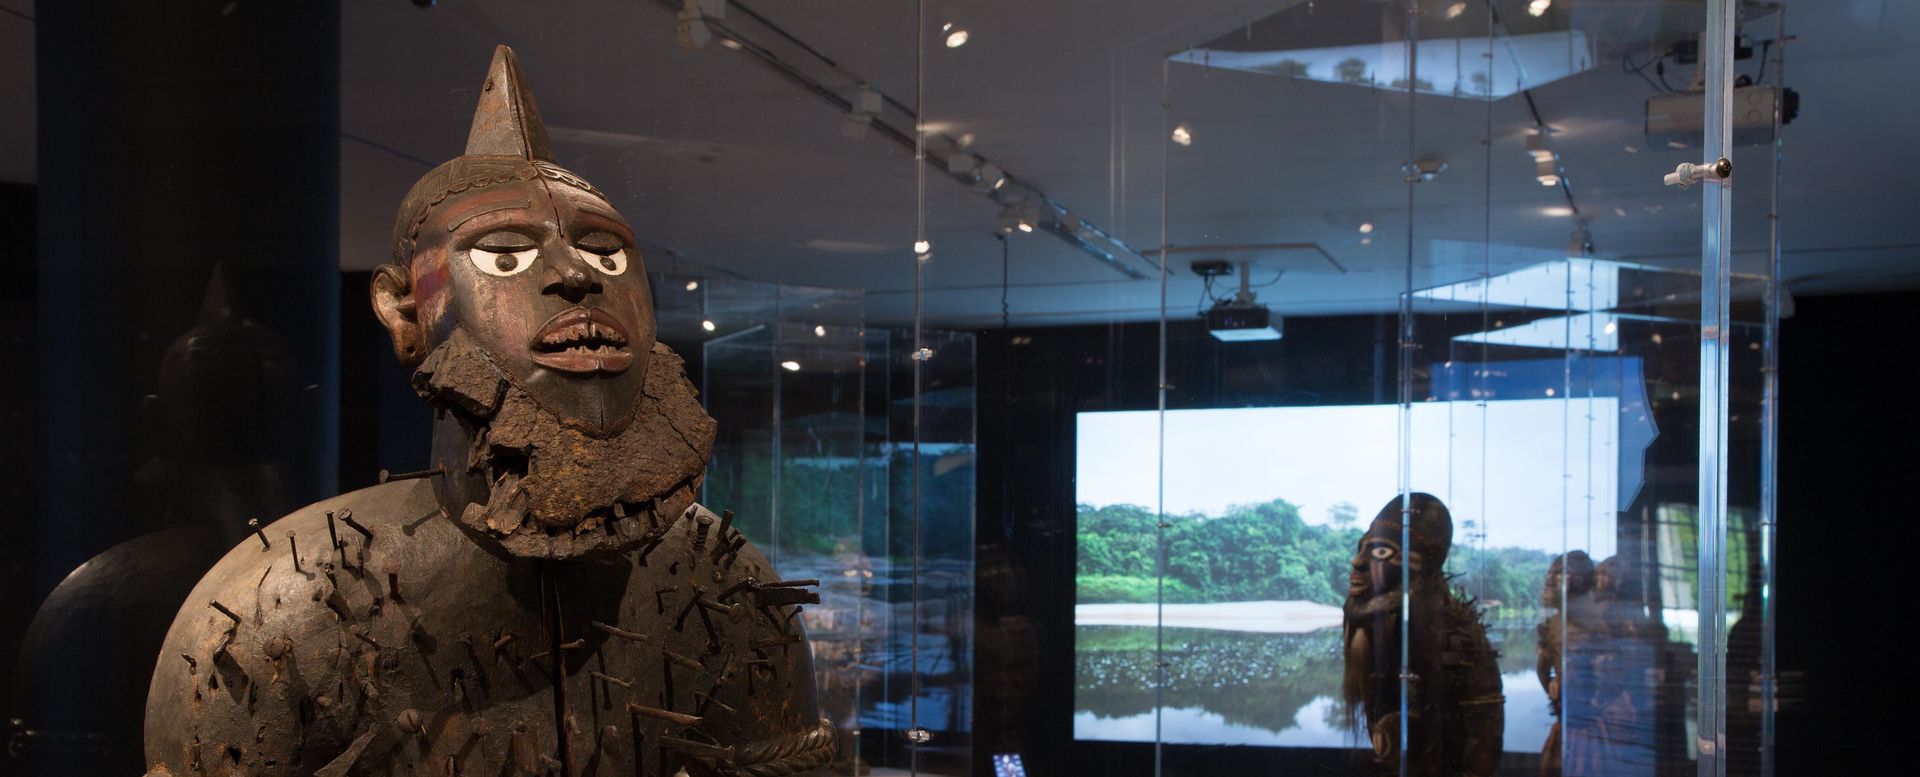 Gallery view of the exhibition "Kongo: Power and Majesty"